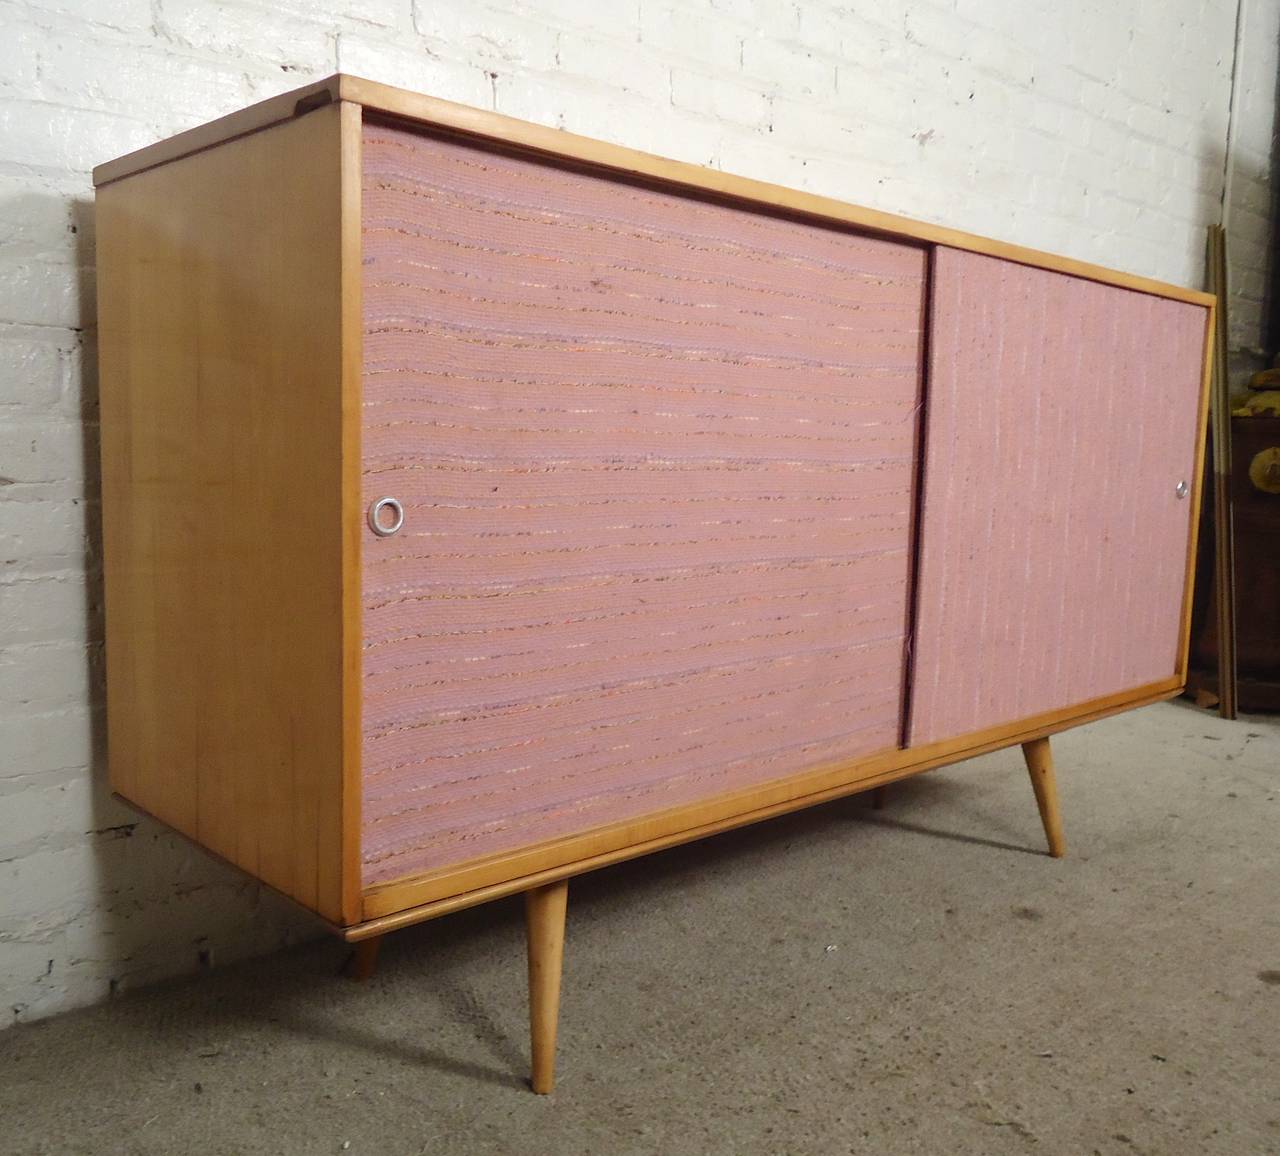 Classic credenza designed by Paul McCobb for Winchendon, with sliding grass cloth doors, blonde maple wood and short cone legs. Adjustable shelf on left side. 

(Please confirm item location - NY or NJ - with dealer).